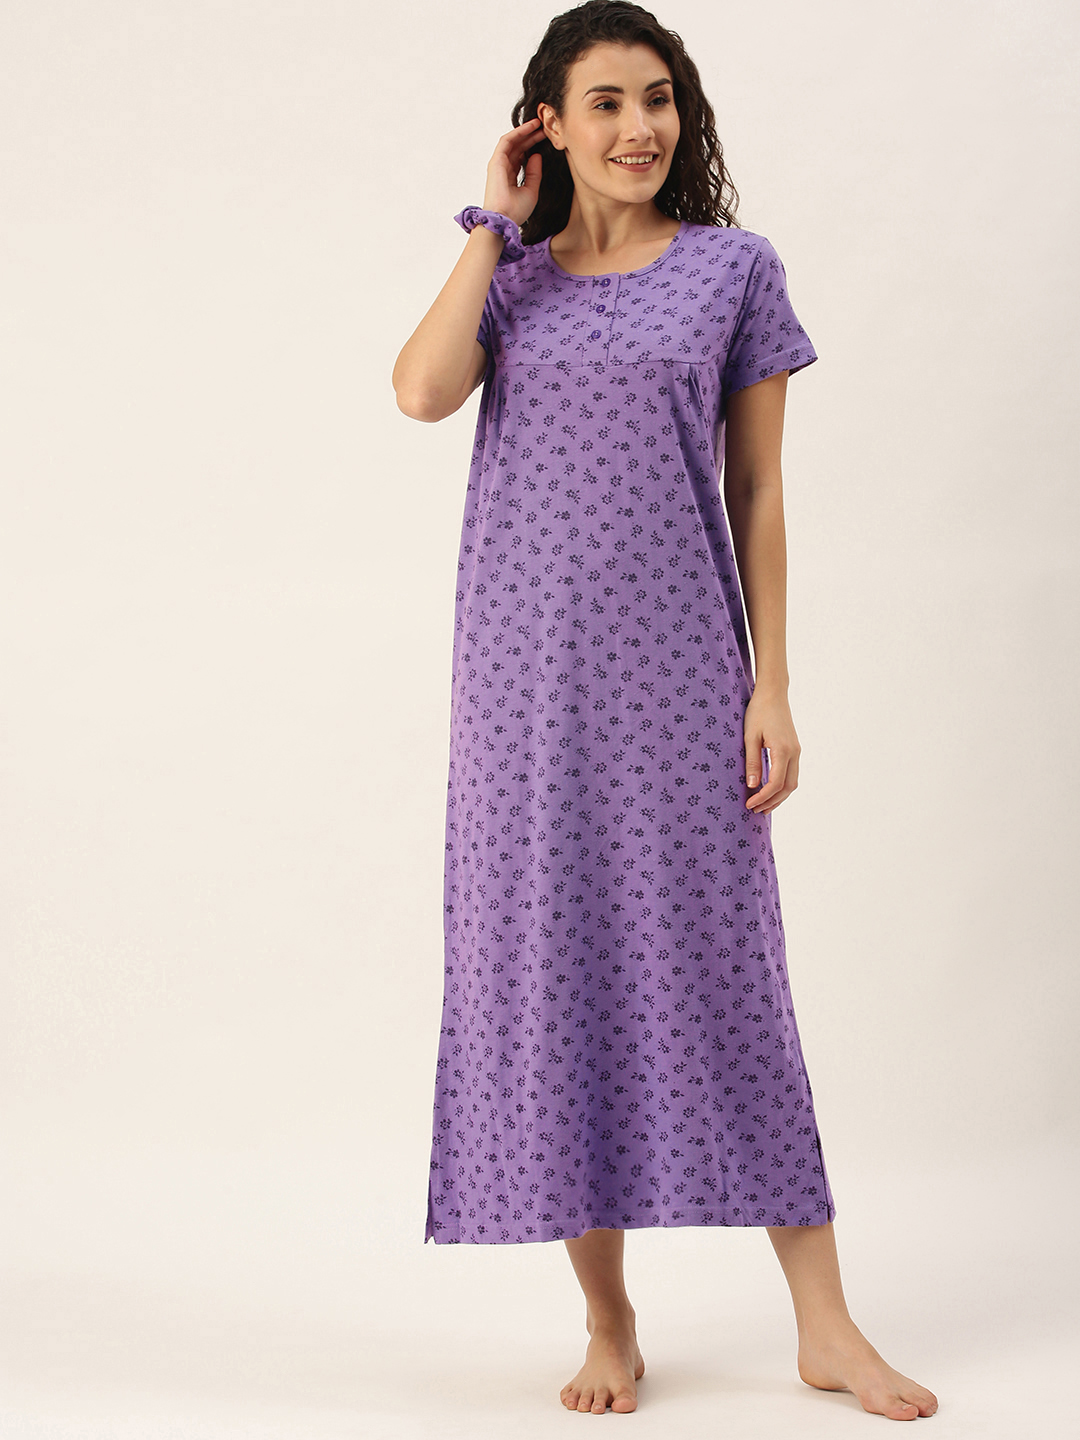 Slumber Jill Violet all over Print Nightdress with scrunchie